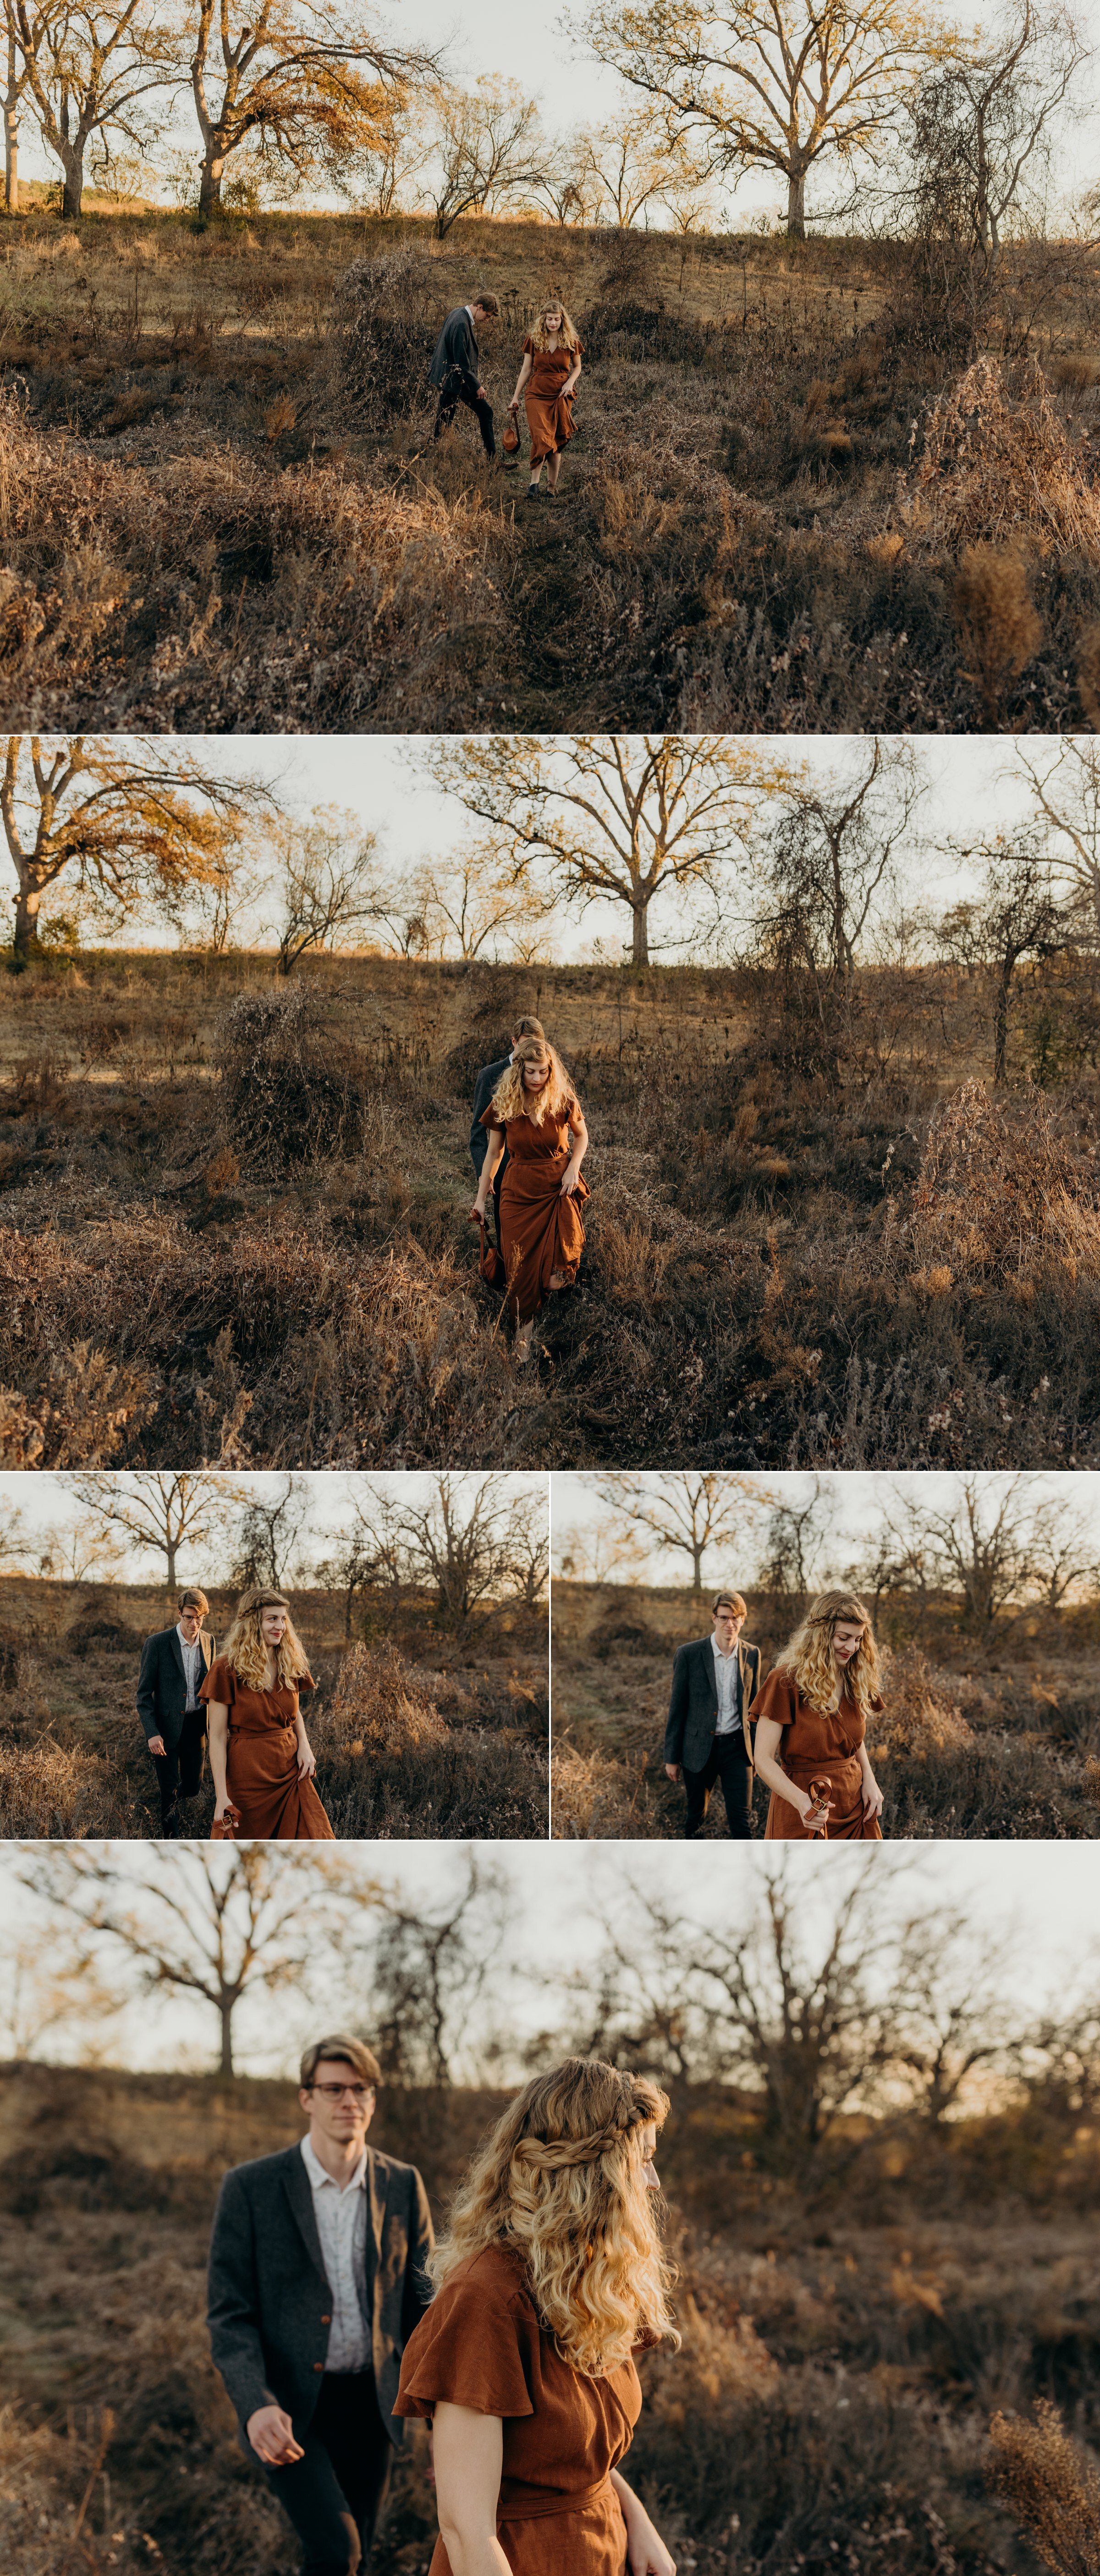  couple walking commons ford ranch park austin texas engagement session wedding elopement photographer 